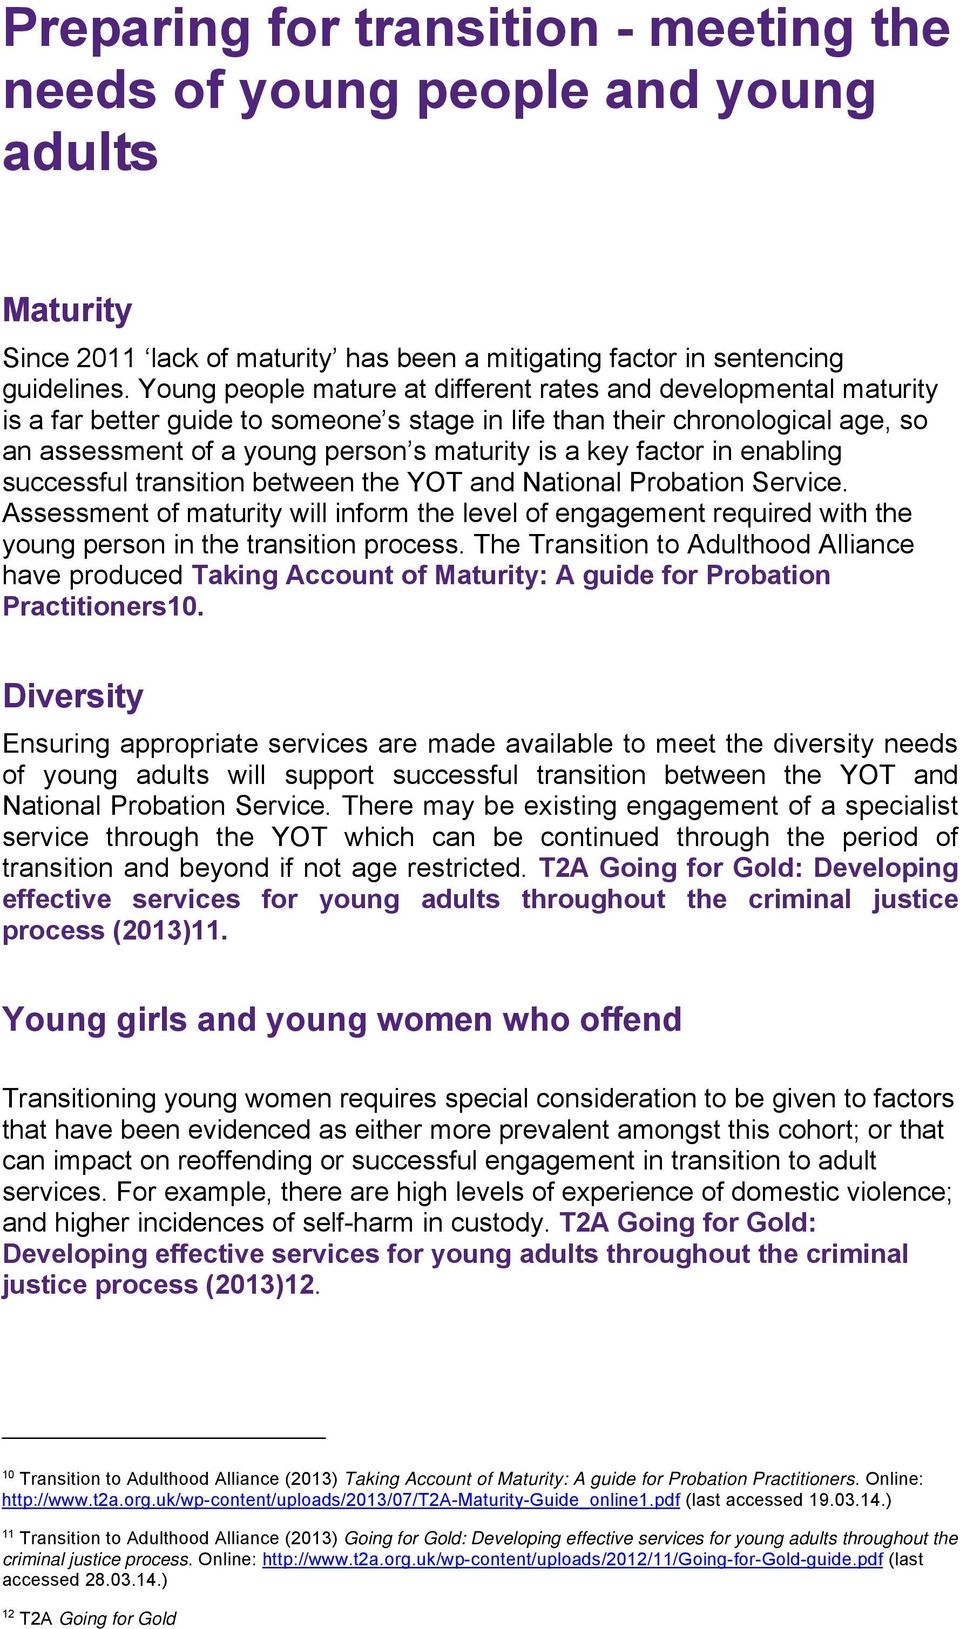 factor in enabling successful transition between the YOT and National Probation Service.